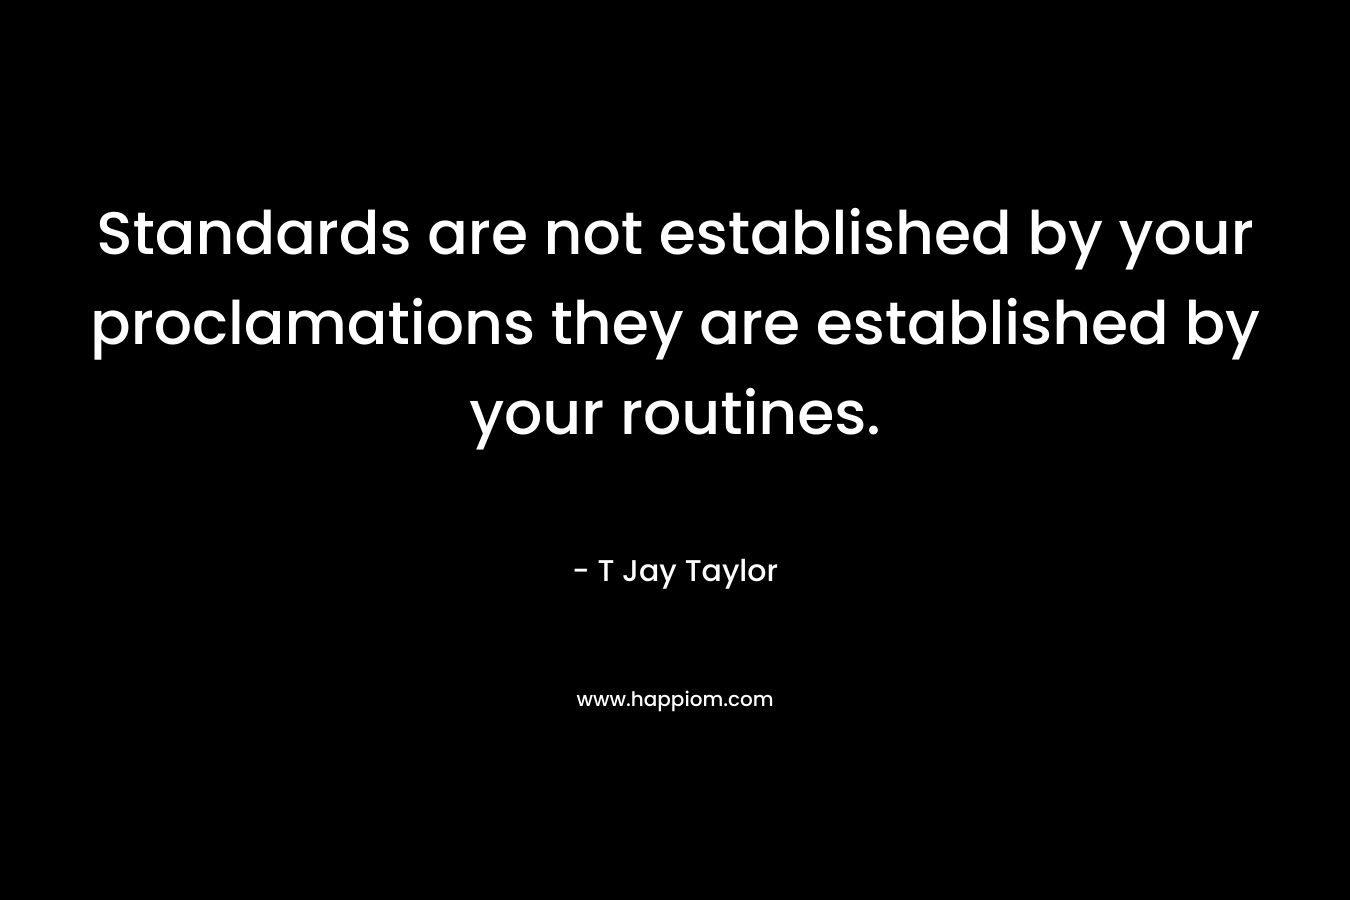 Standards are not established by your proclamations they are established by your routines.